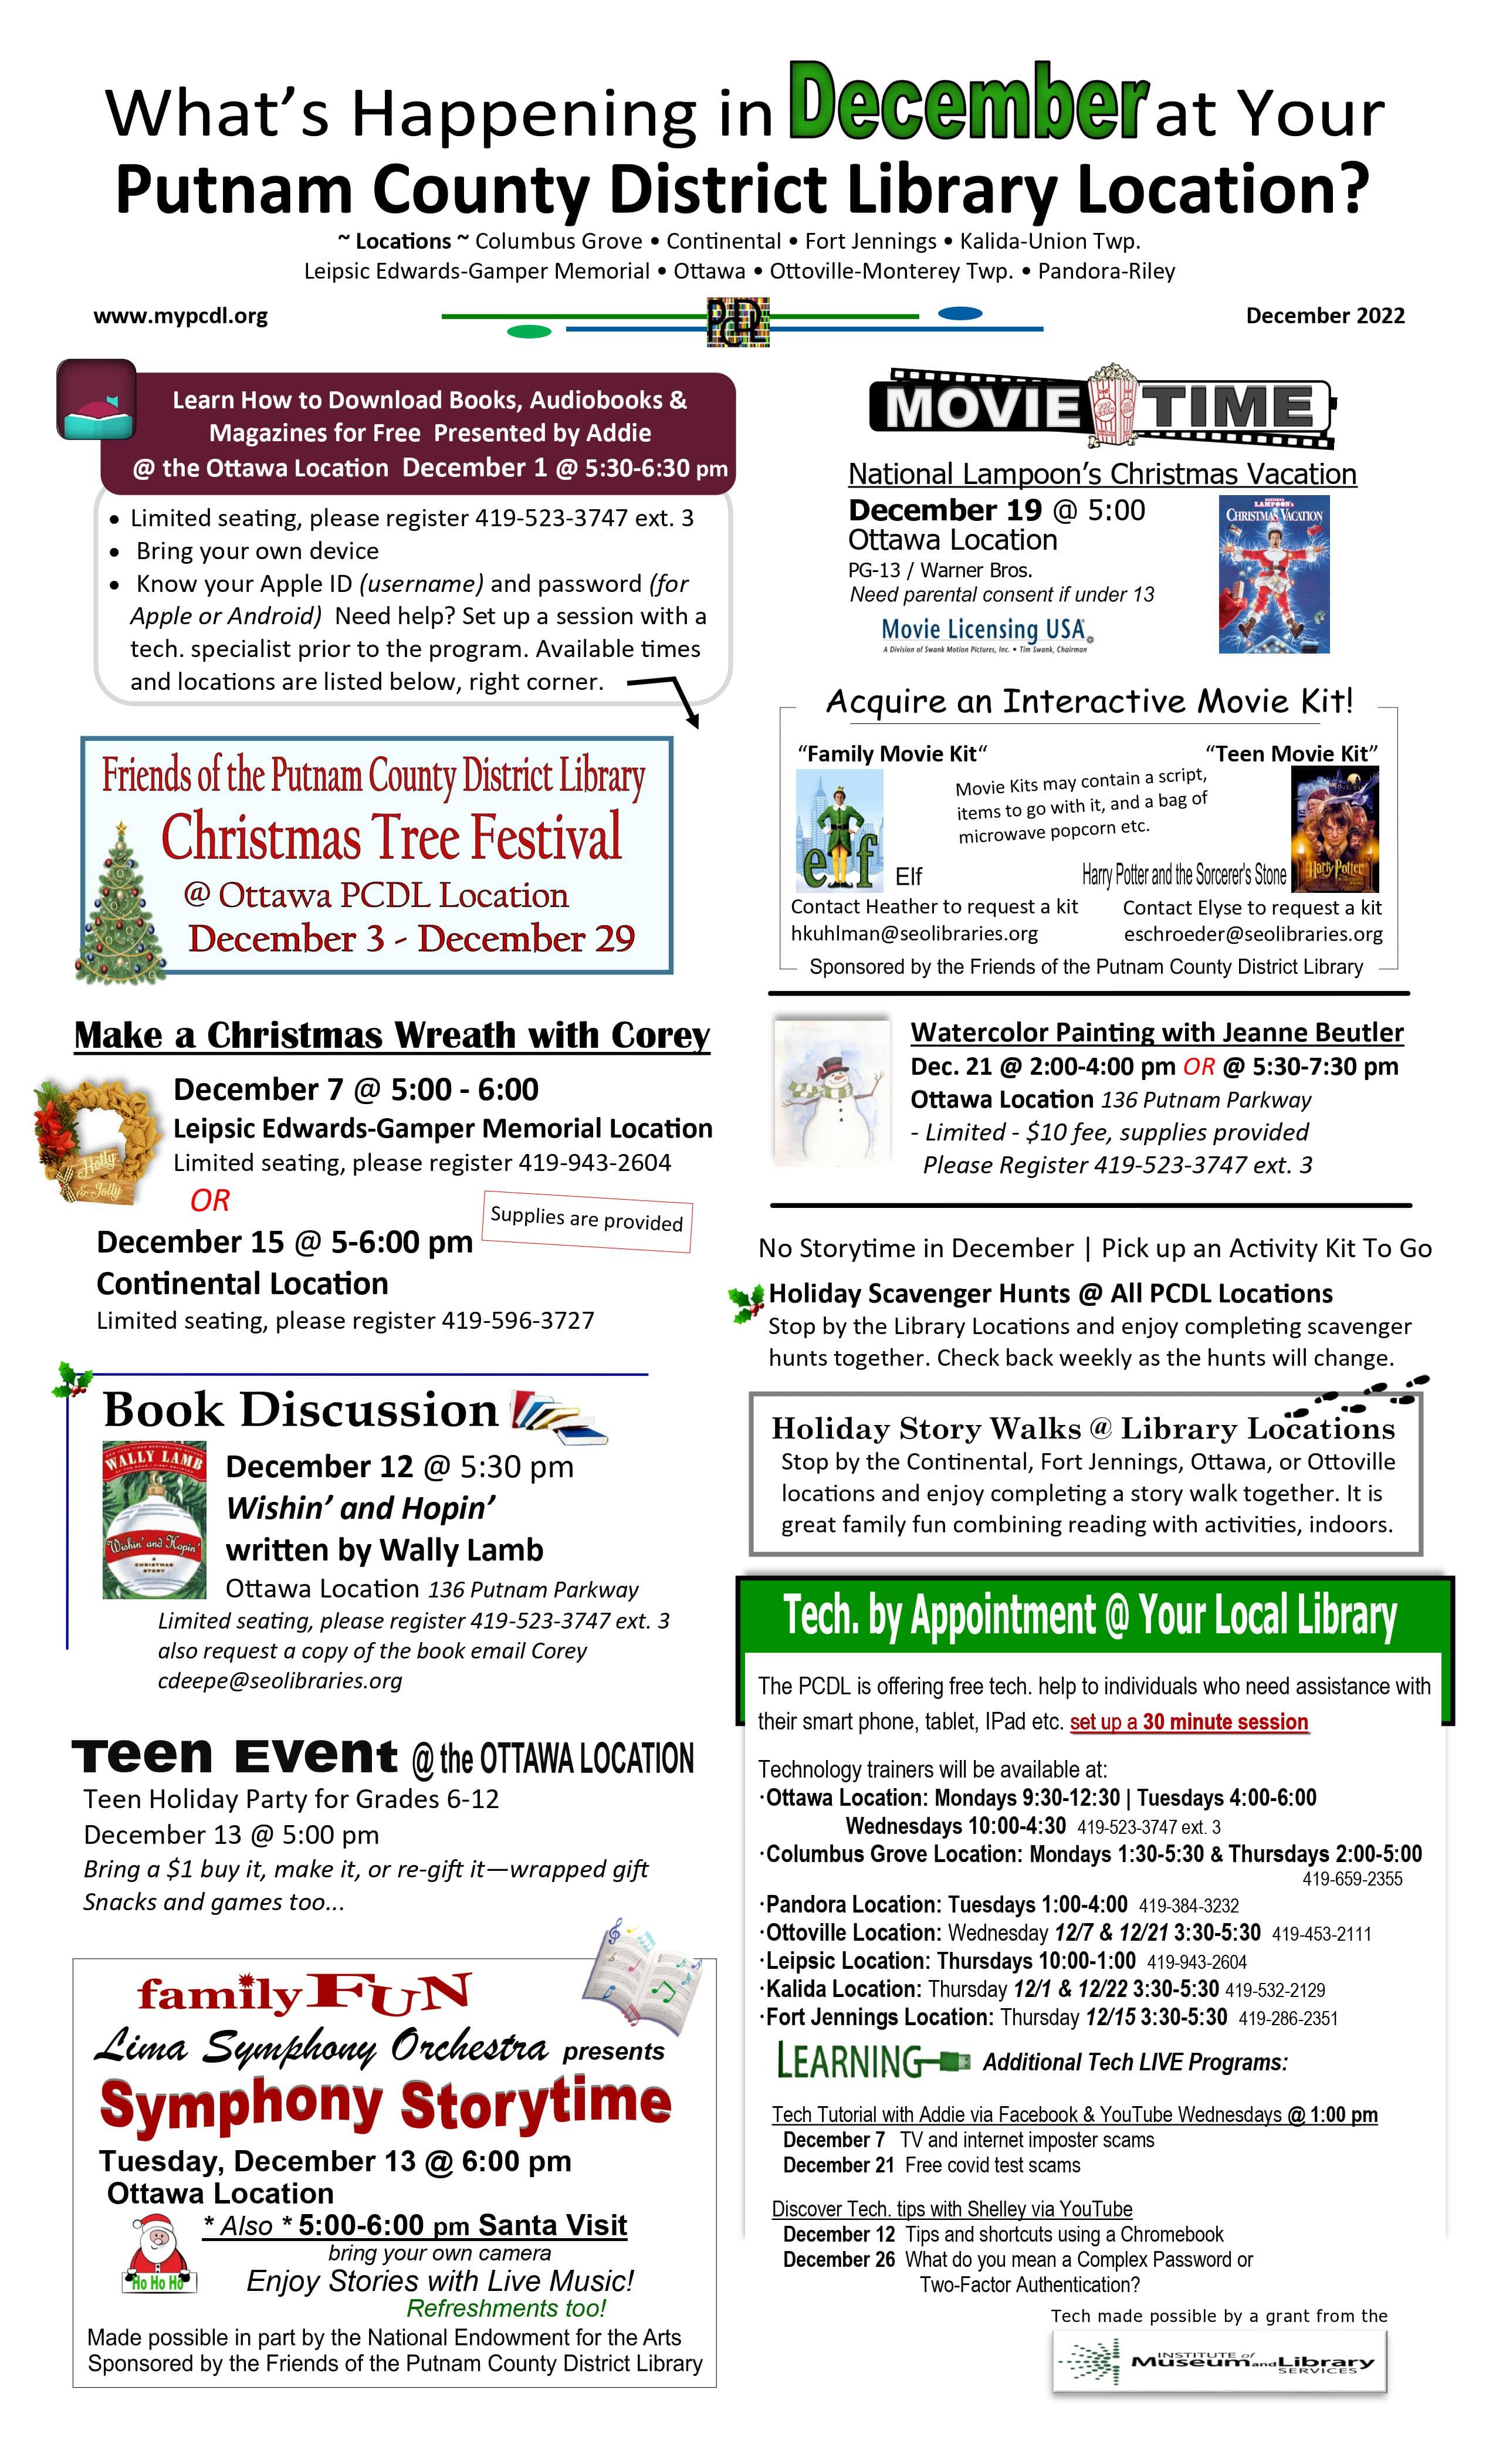 What's happing in December at your Putnam County District Library Location flyer